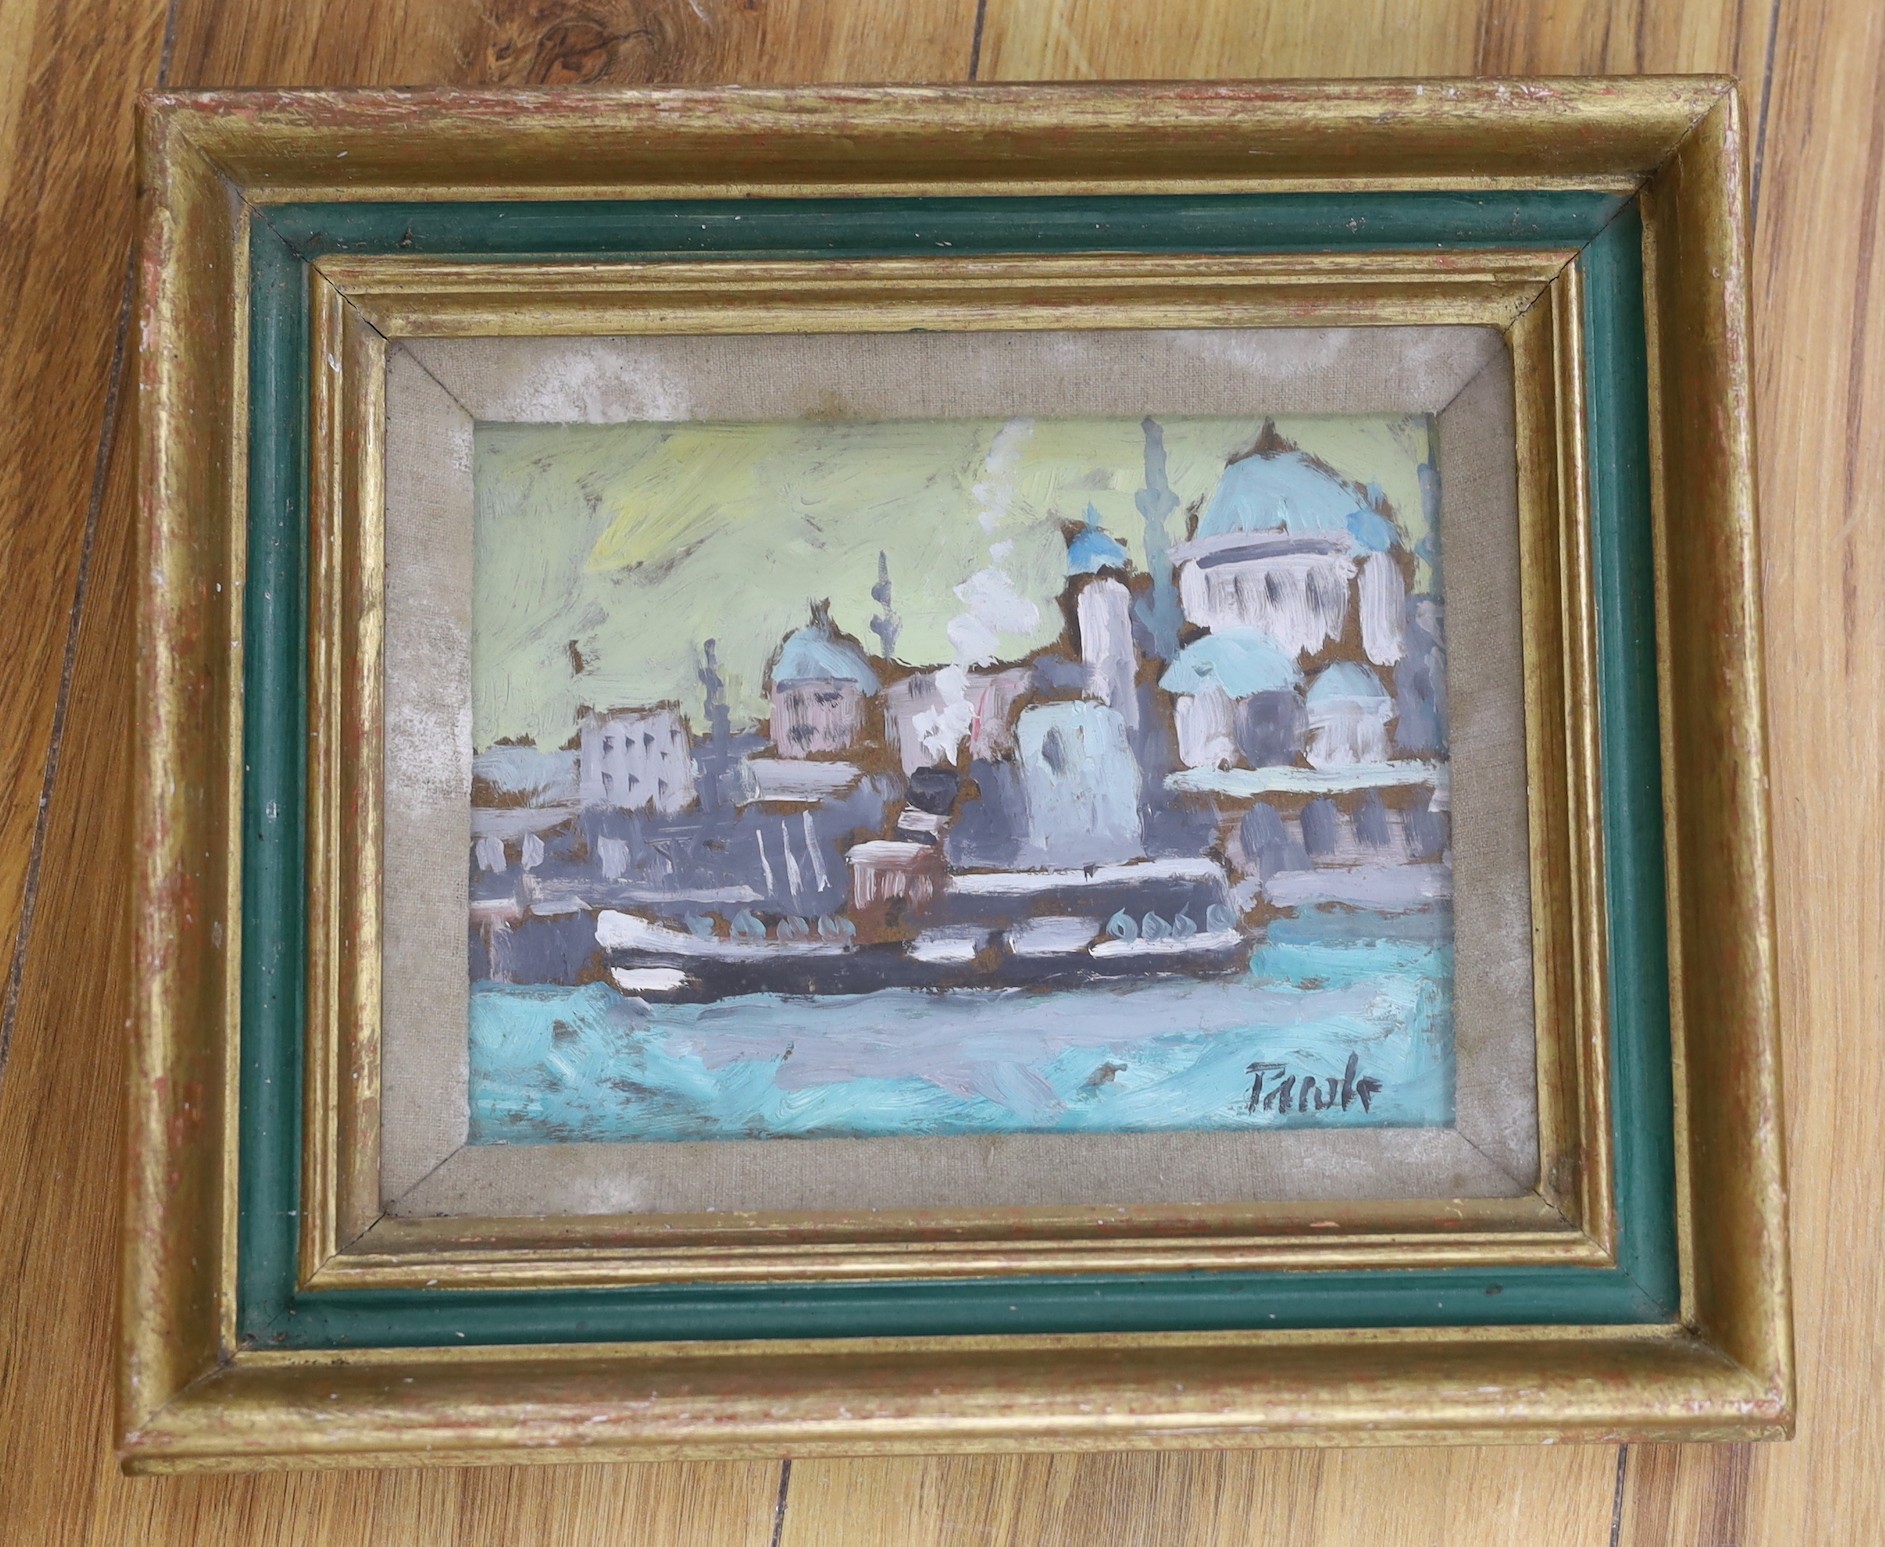 John Pawle (1915-2010), oil on board, 'Istanbul', signed, dated 1989 verso, 14 x 19cm